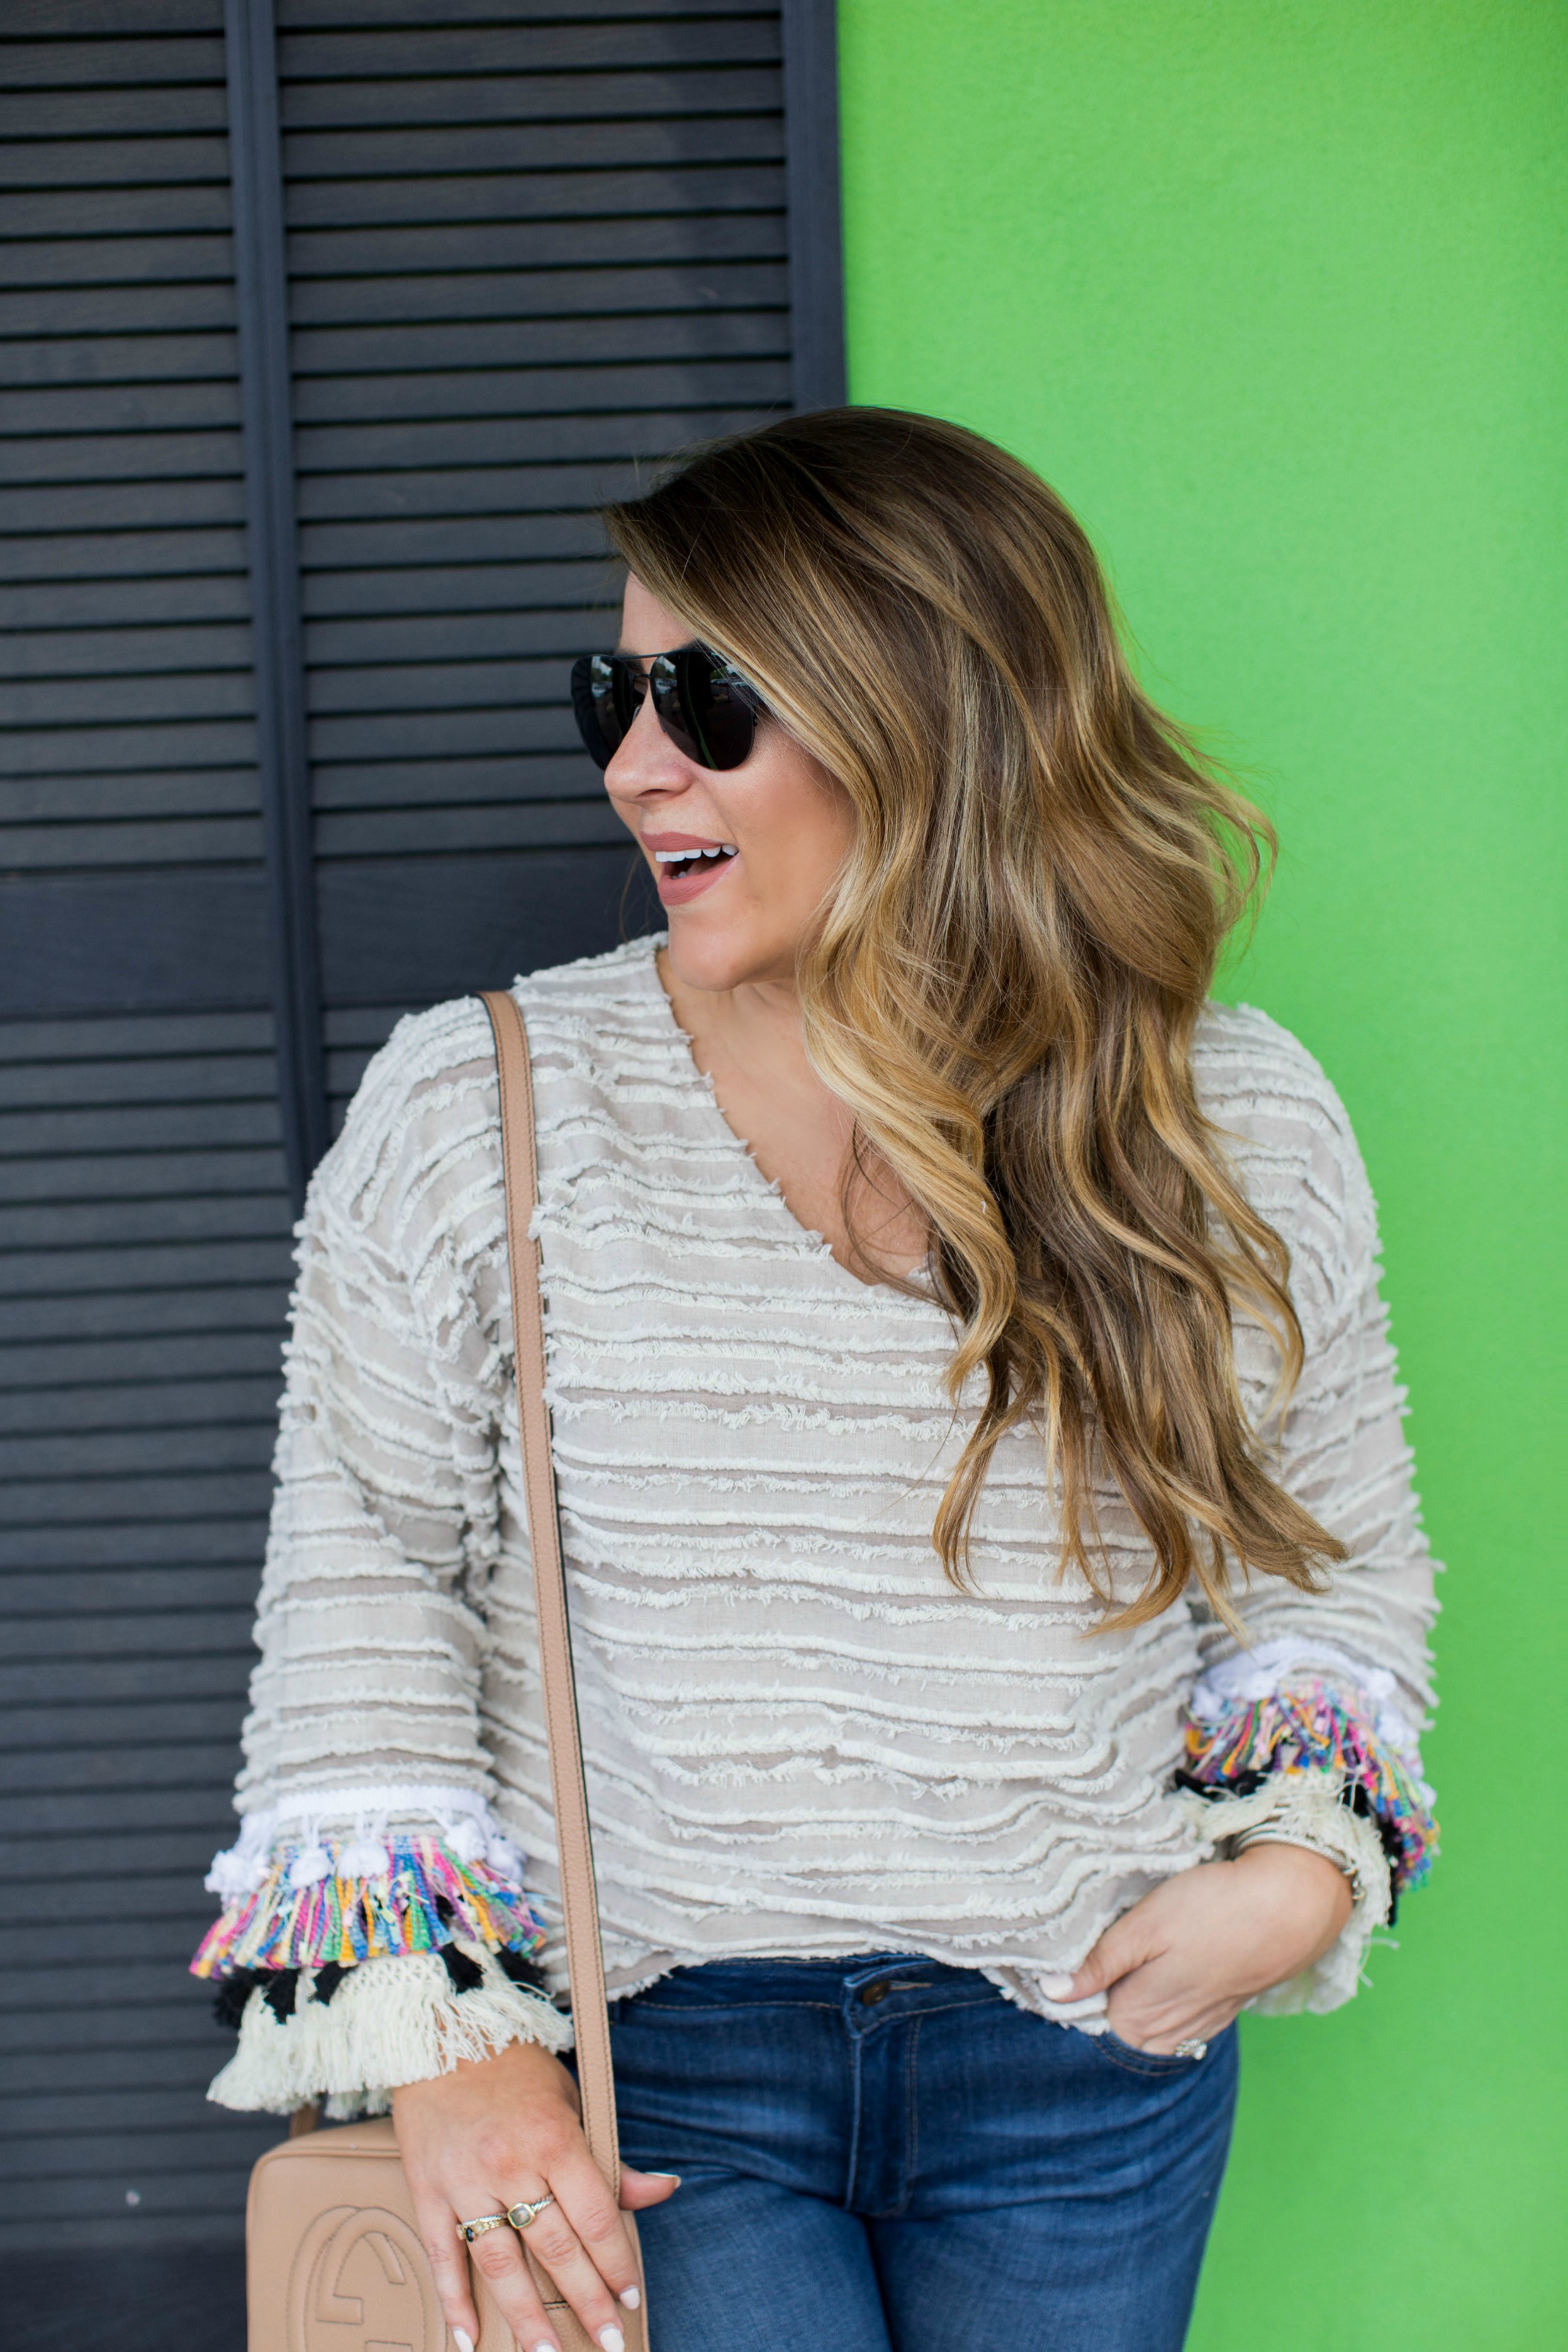 Fringe and Bell Sleeves | coffeebeansandbobbypins.com